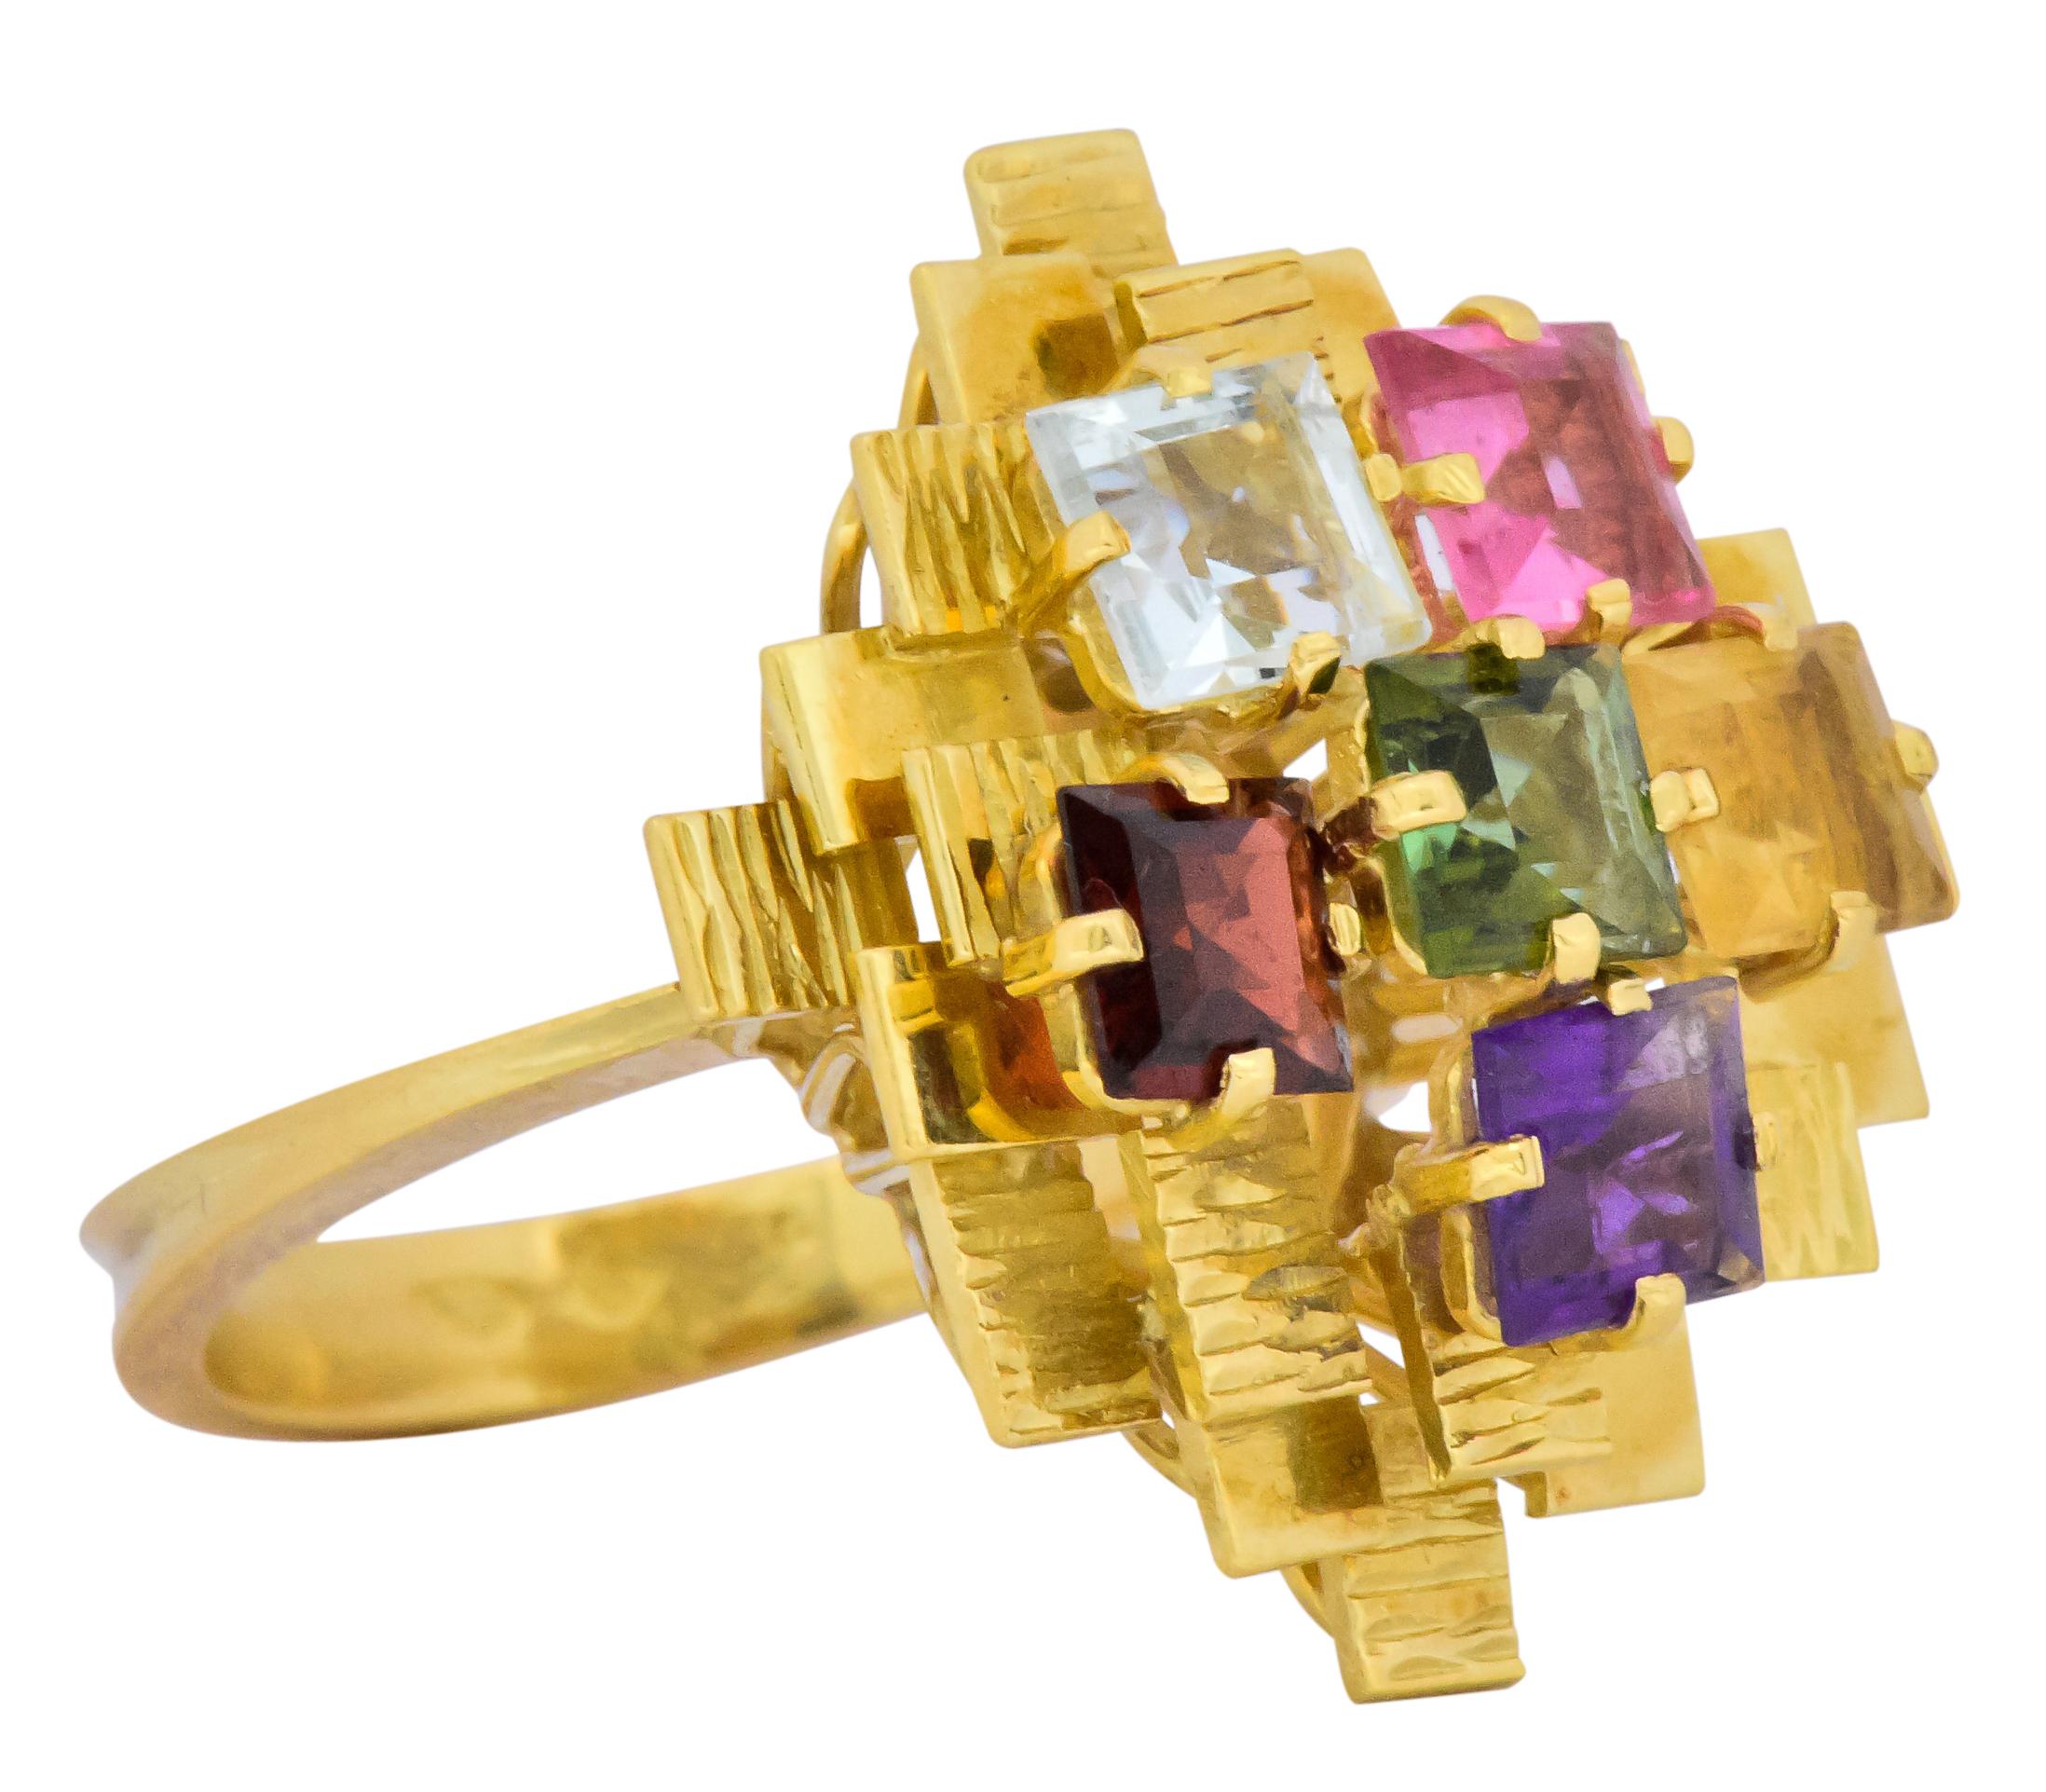 Set with six square step cut gemstones including tourmaline, amethyst, citrine, peridot, aquamarine and garnet, all bright vivid colors

Total gemstone weight approximately 4.35 carats

In a tiered motif with textured and polished gold square